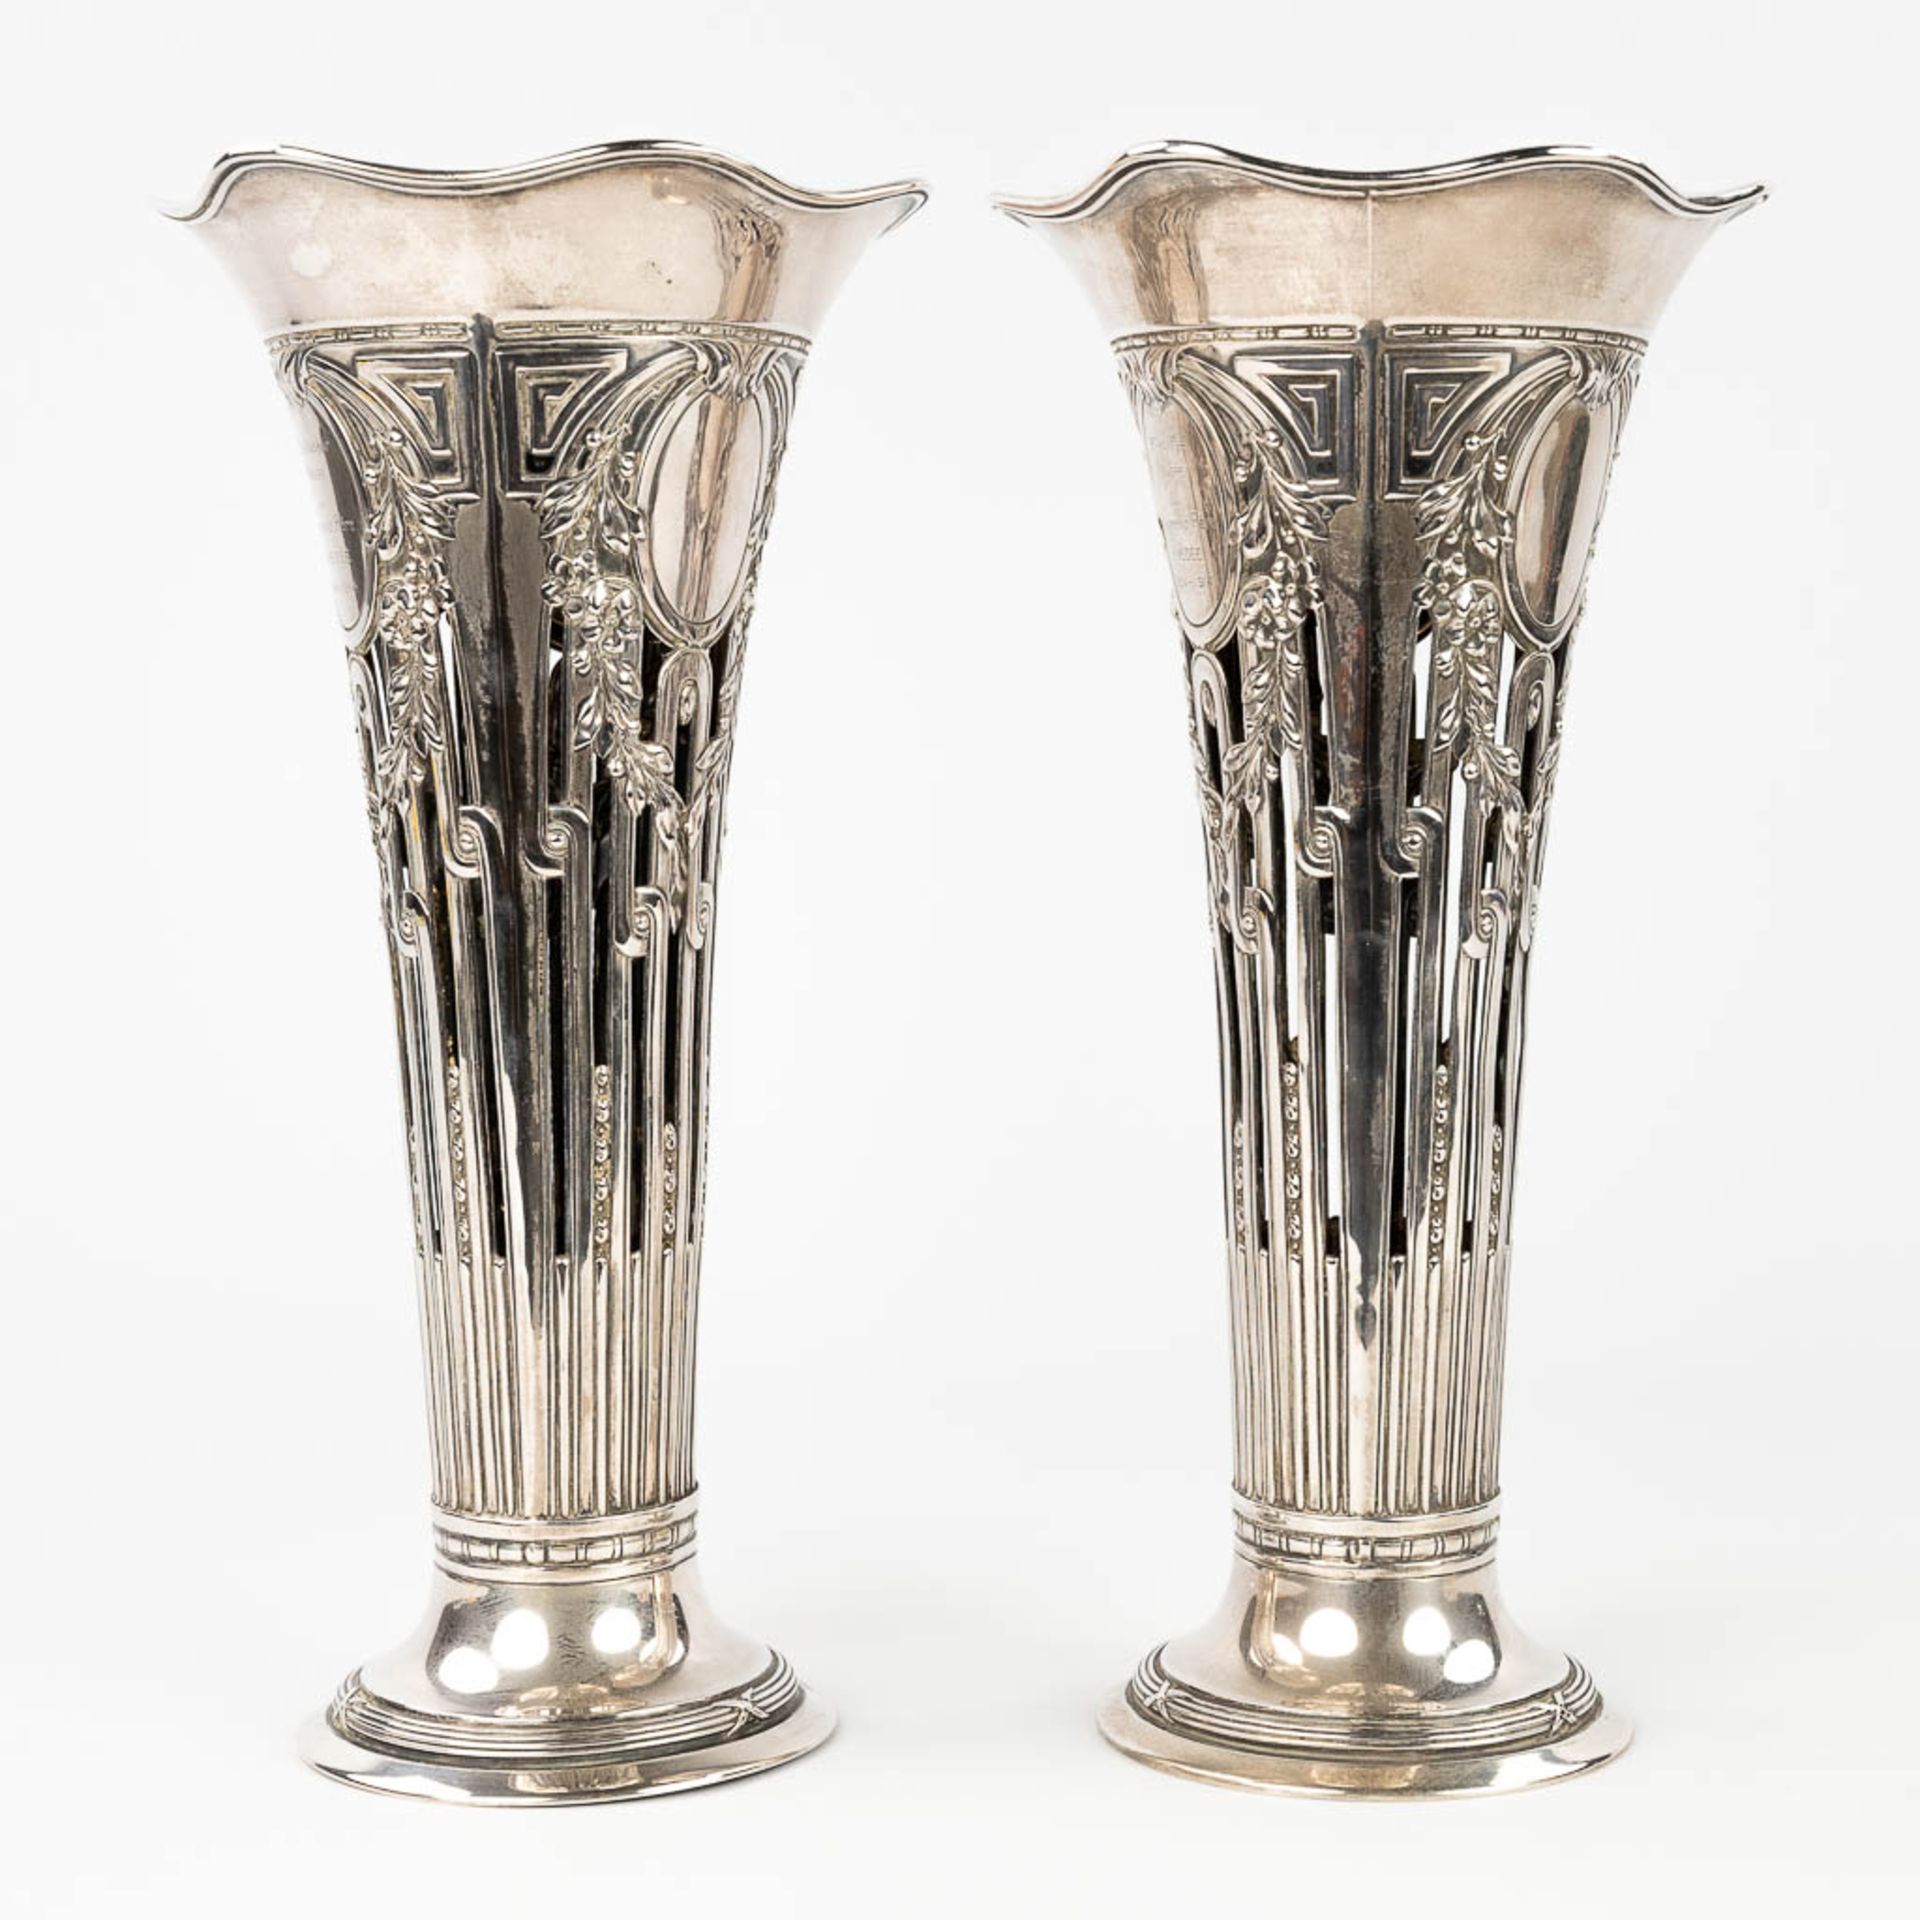 A pair of vases made of silver and marked 800. Made in Germany. 693g. 20th C. (H:31 x D:15,5 cm) - Image 8 of 14